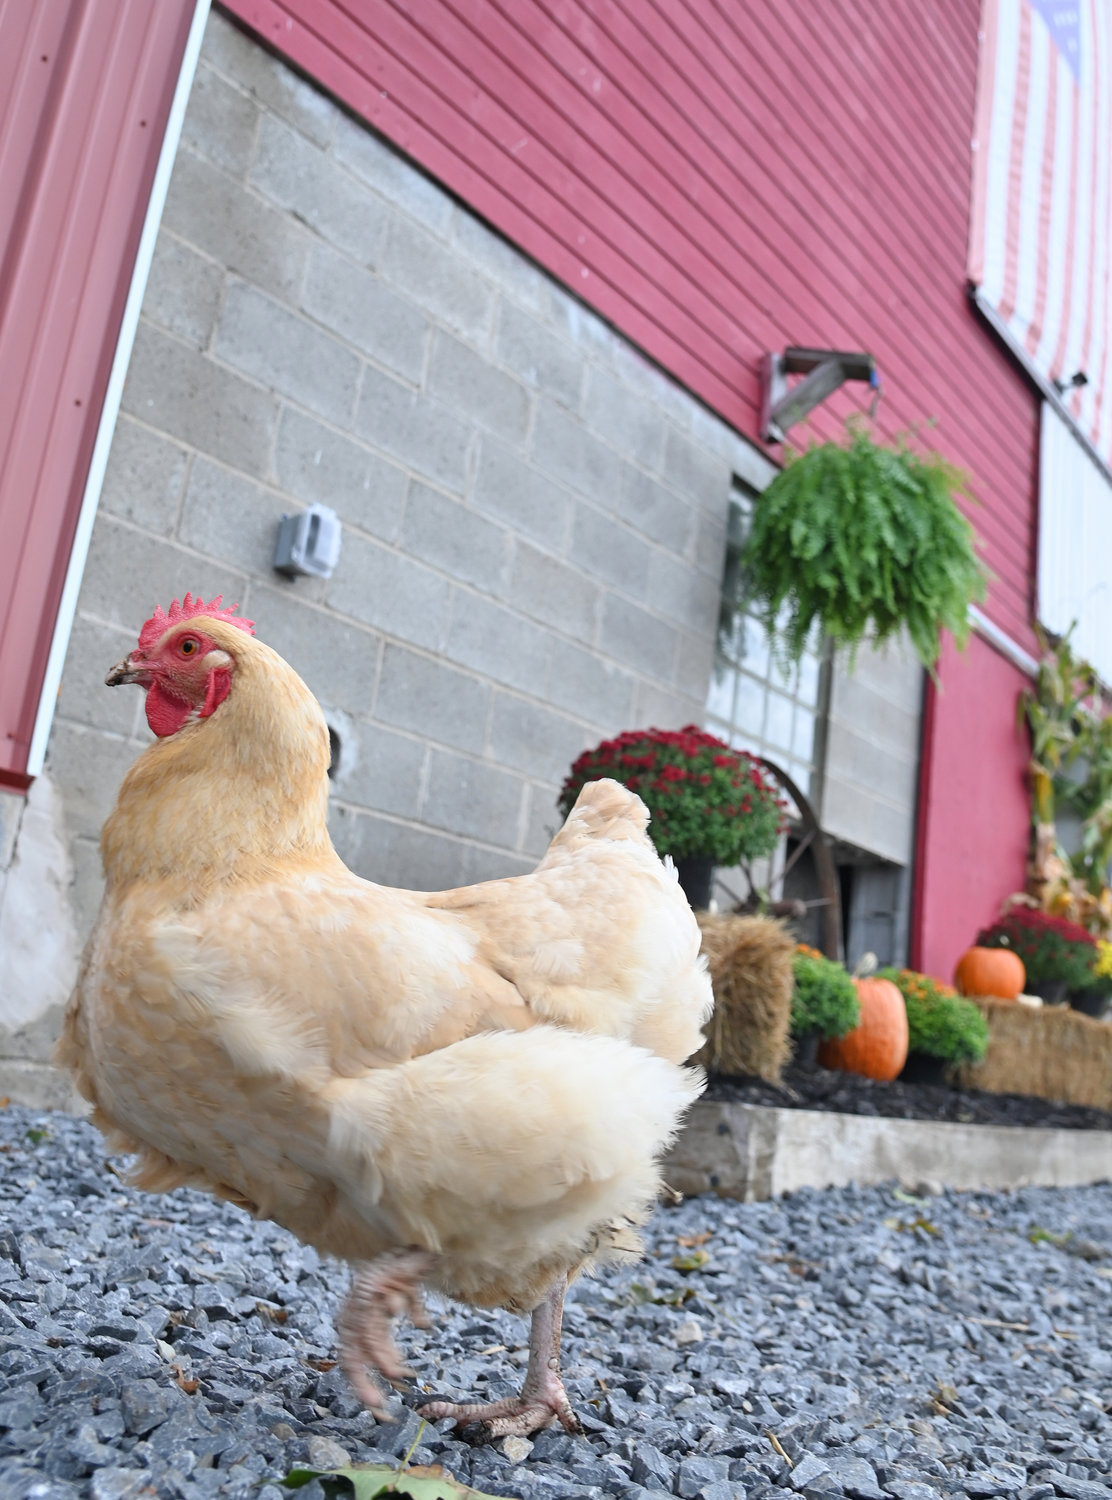 A chicken steals some of the limelight during a tour of the Collins Farm and Creamery in Rome on Monday.